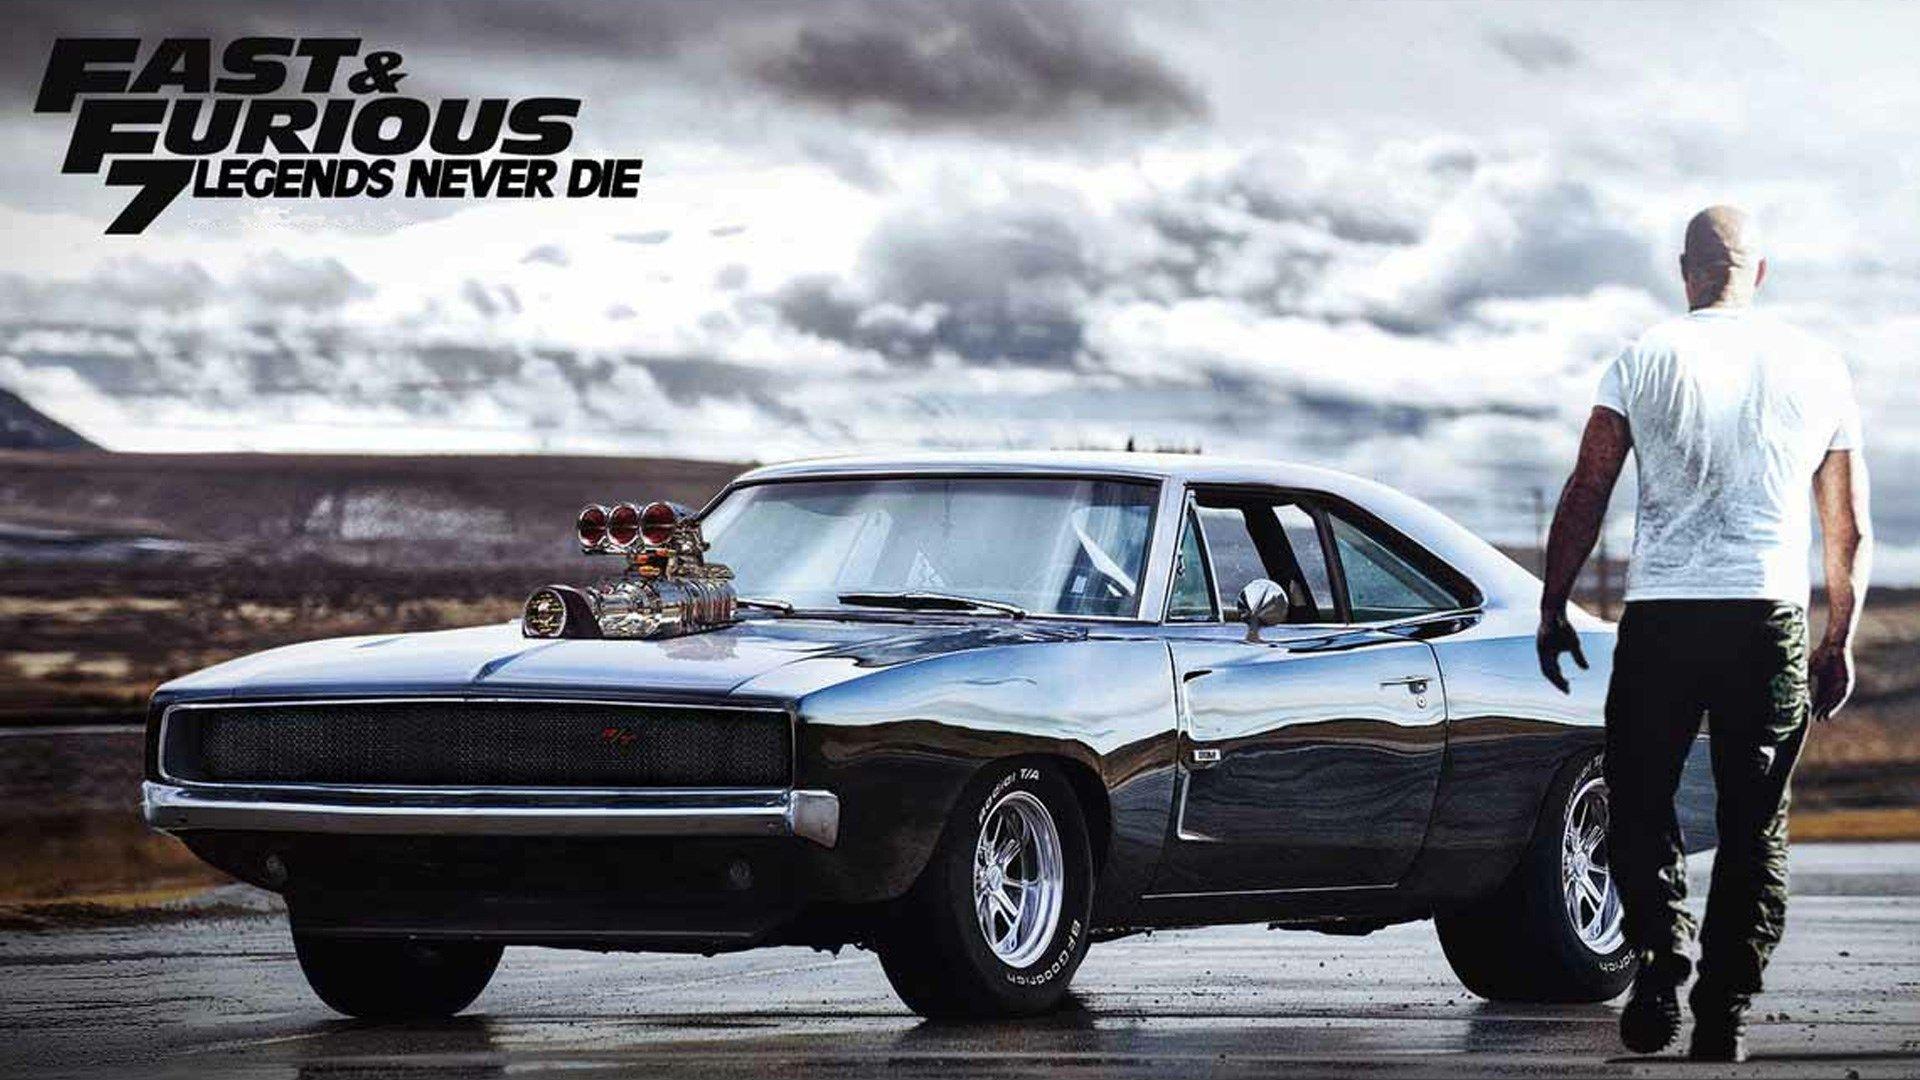 fast furious 7 legends never die 1920x1080 wallpaper. Fast and furious, Muscle cars, Cars movie